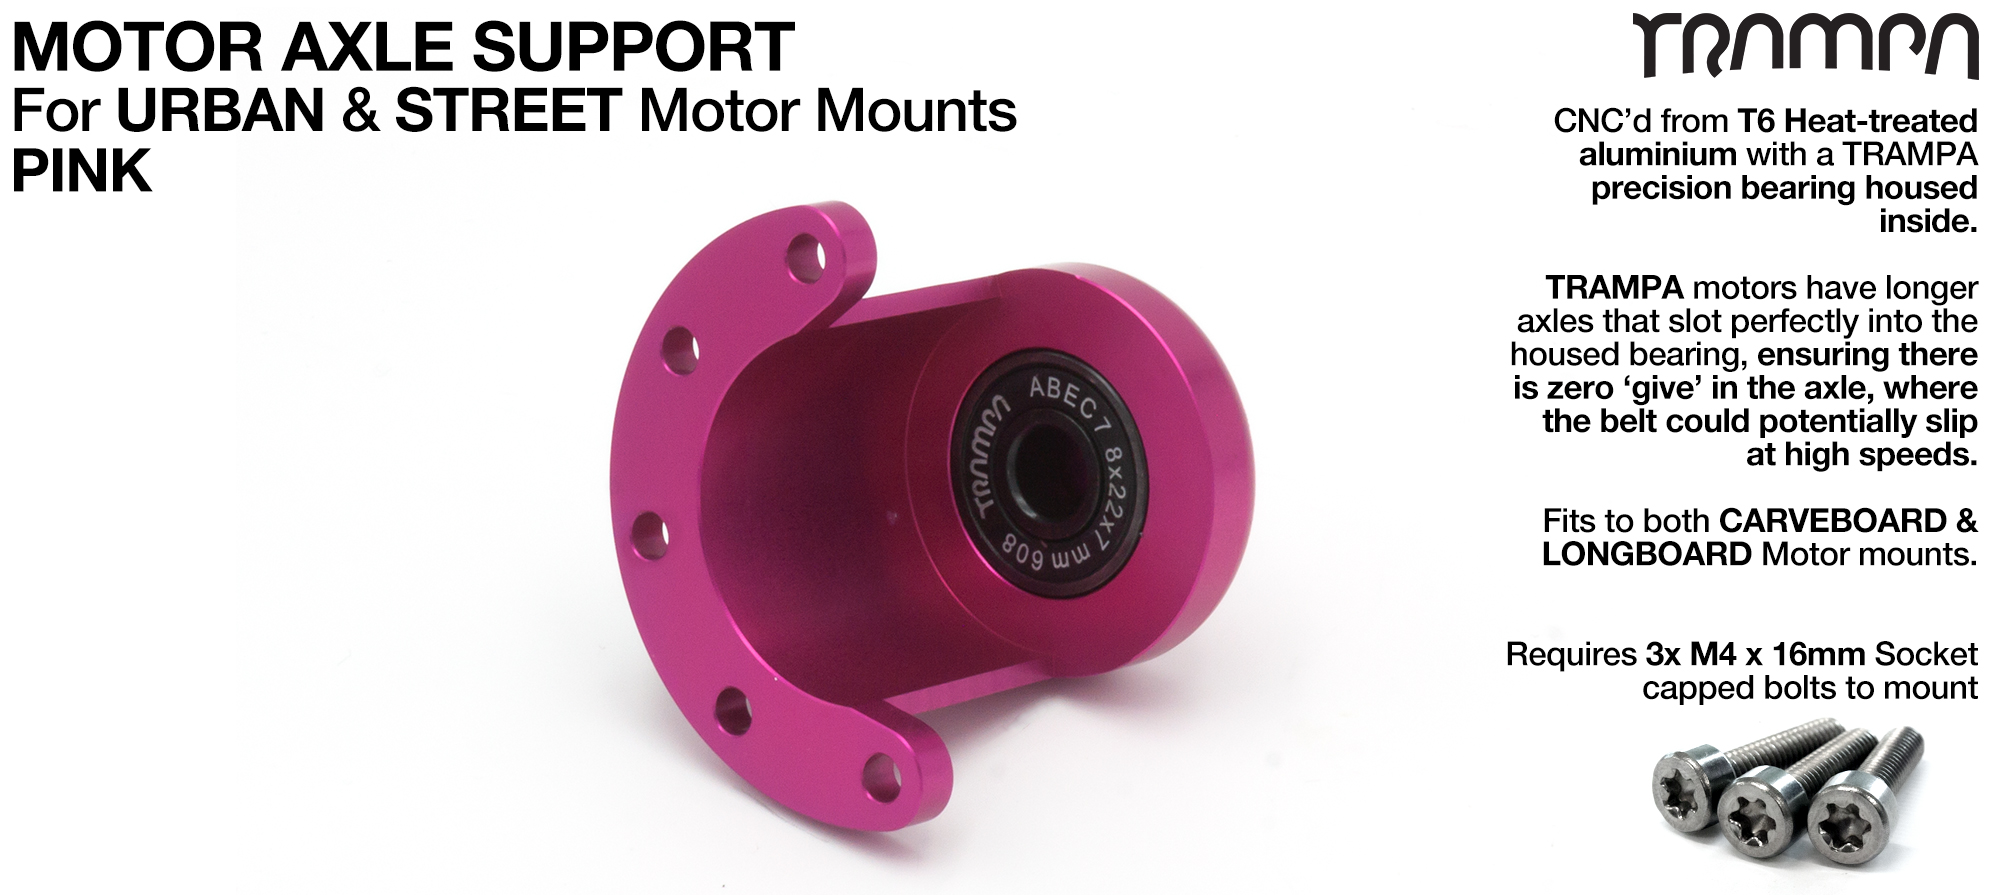 Motor Axle Support Housing with TRAMPA R608 8x22x7mm Bearing, C-Clip & Stainless Steel fixing Bolts for ORRSOM Longboard Motor Mounts  - PINK